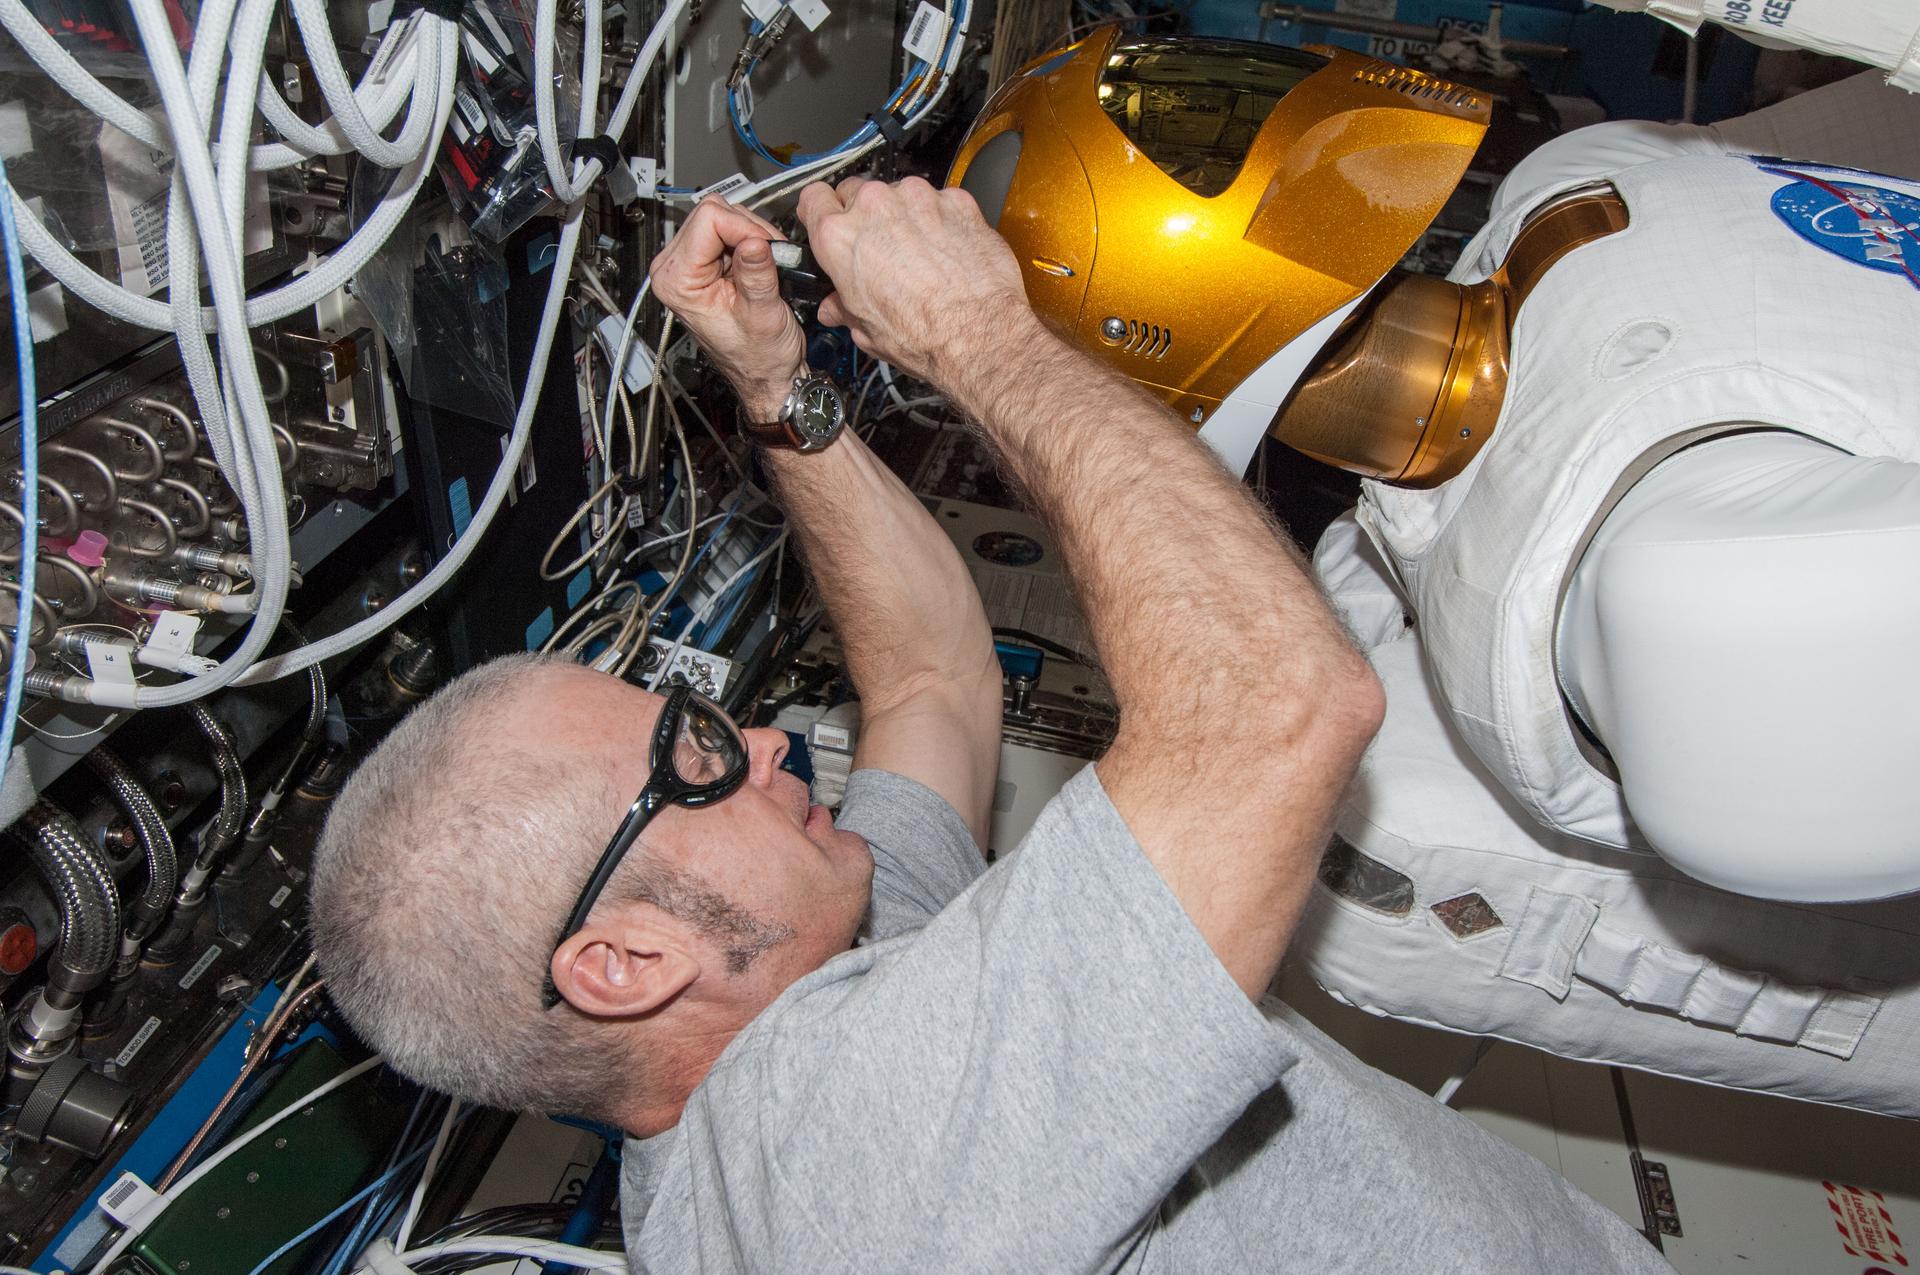 Steve Swanson working on R2's processing unit